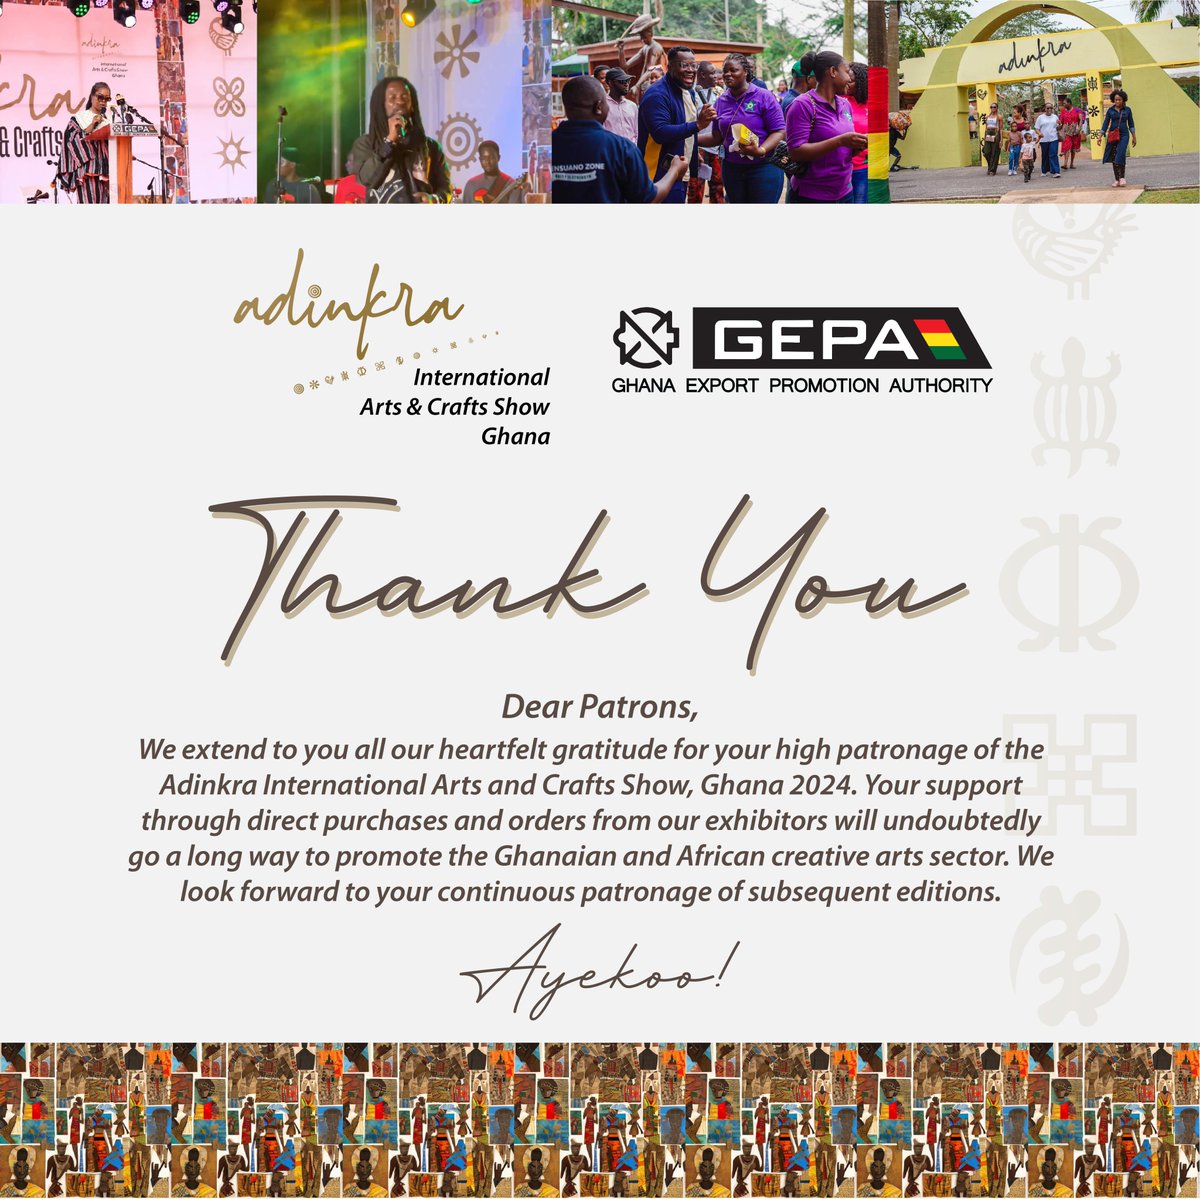 We express gratitude for the support you gave during the Adinkra International Arts and Crafts Show Ghana and eagerly anticipate your ongoing support in future editions. #adinkra2024gh #ExportGhanaExportMore #ghana #GEPA